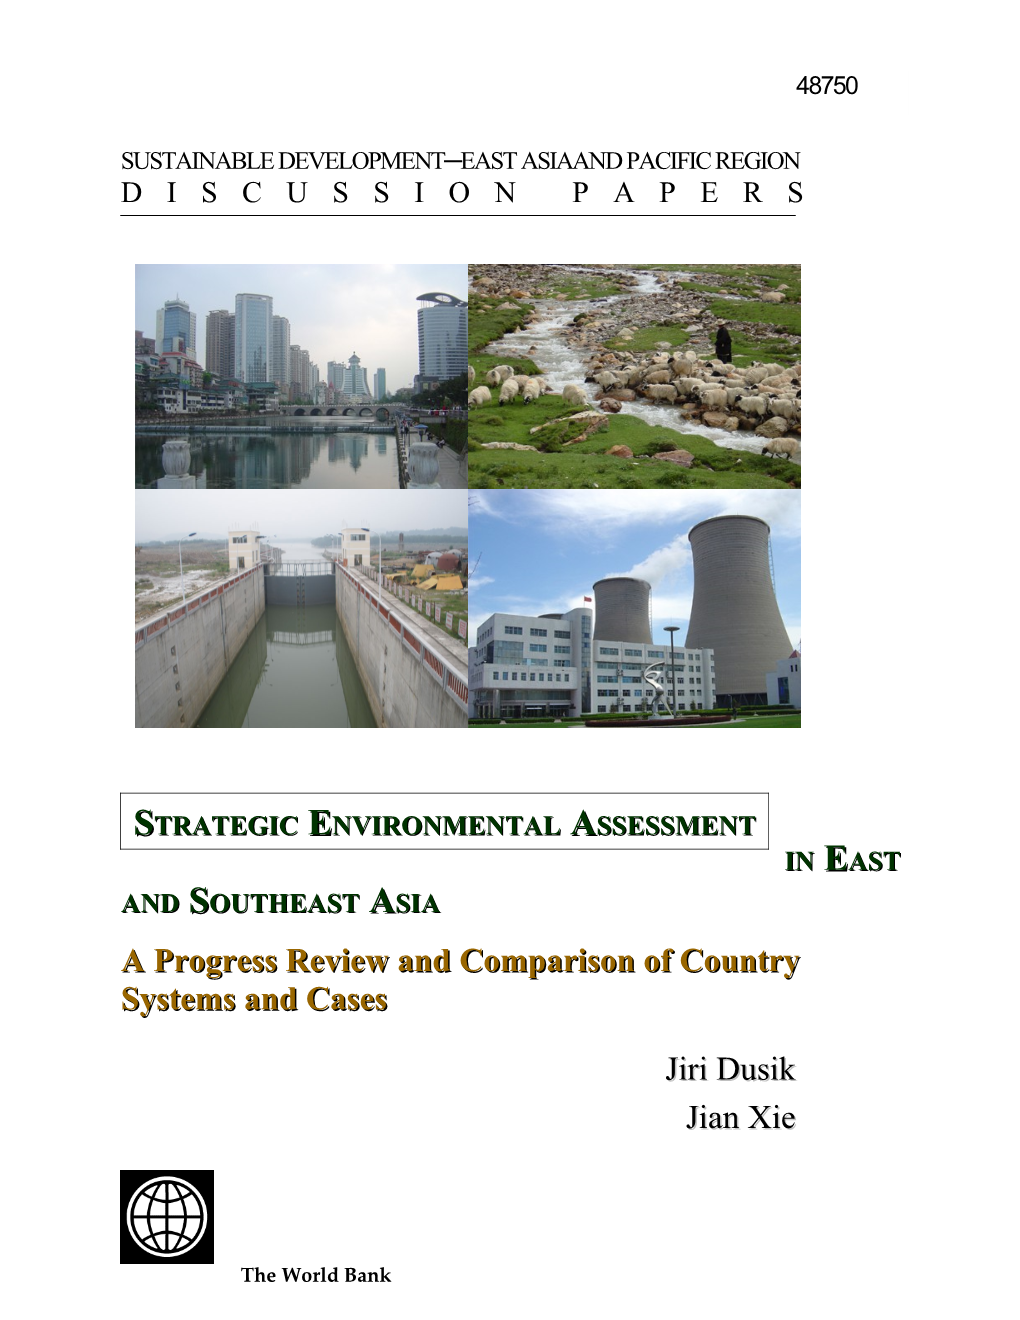 Overview of Strategic Environmental Assessments